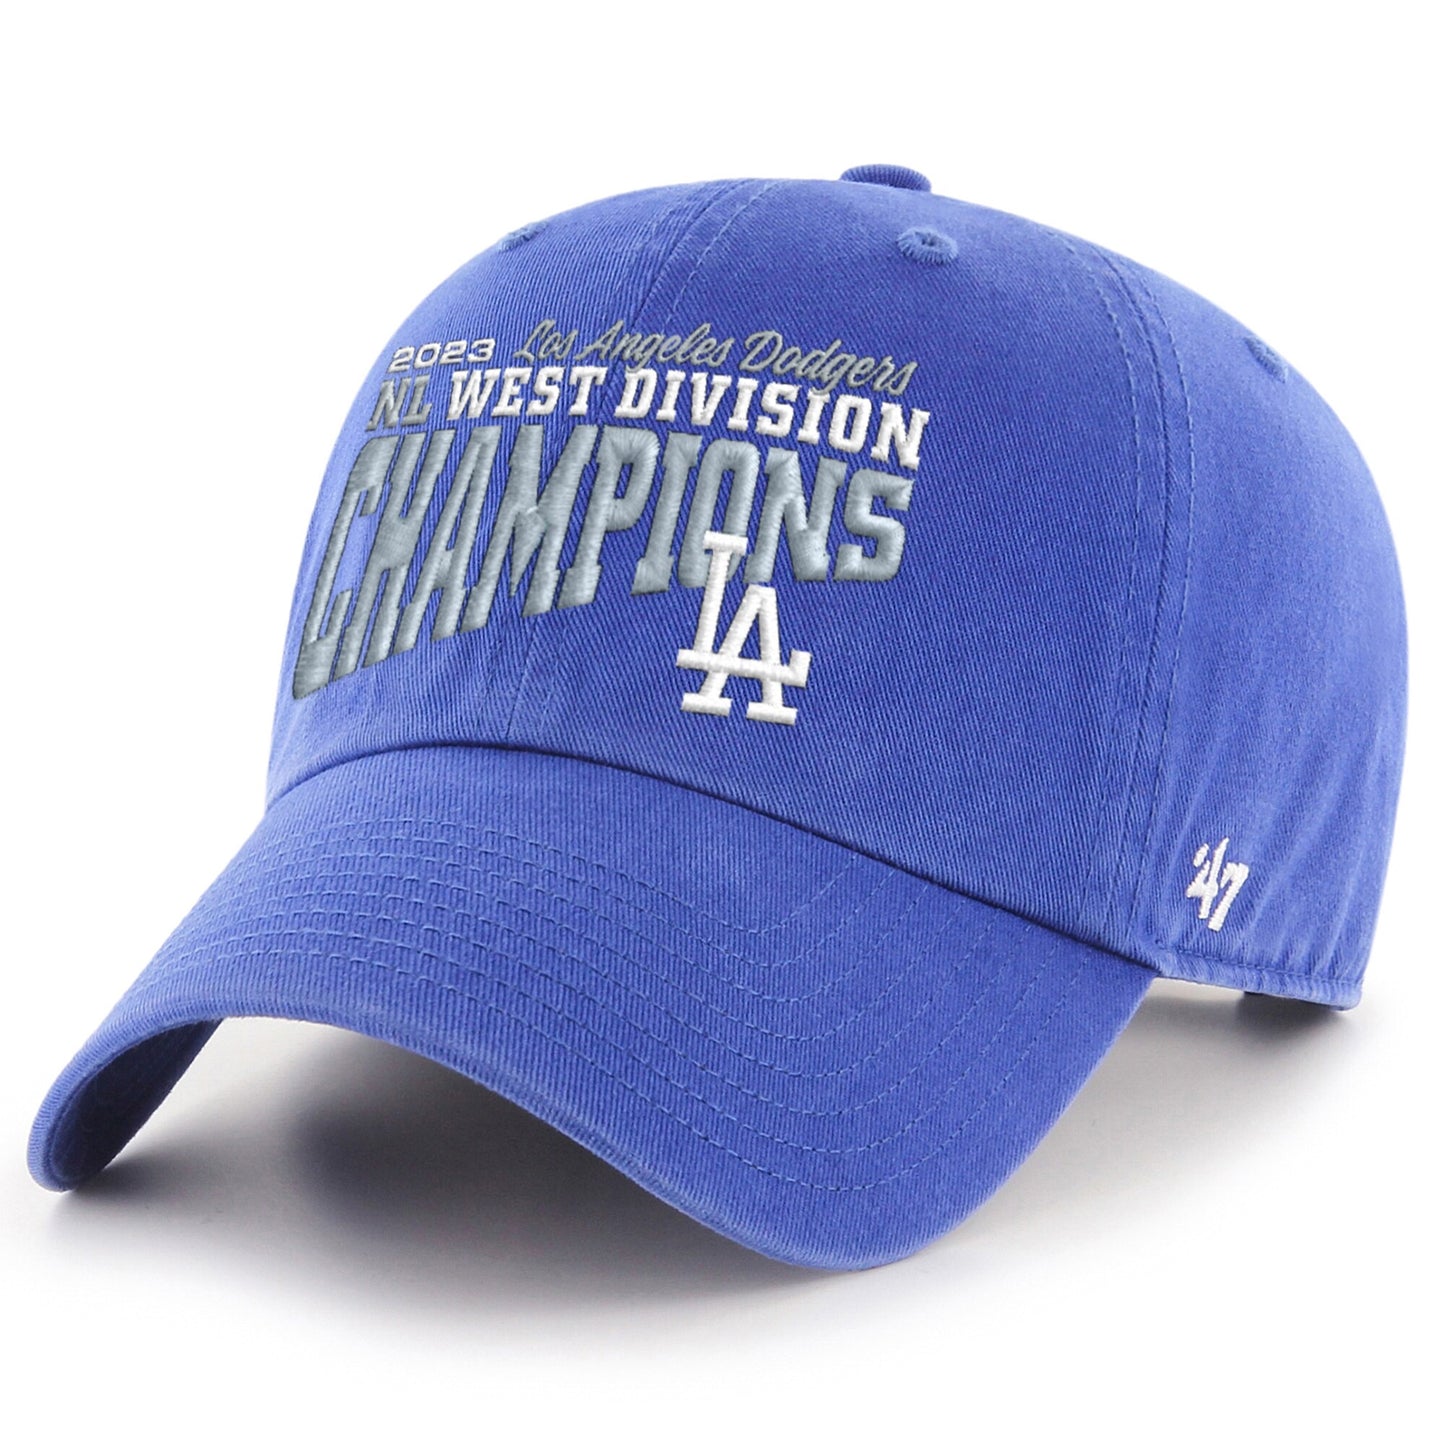 Los Angeles Dodgers '47 2023 NL West Division Champions Clean Up Adjustable Hat - Royal